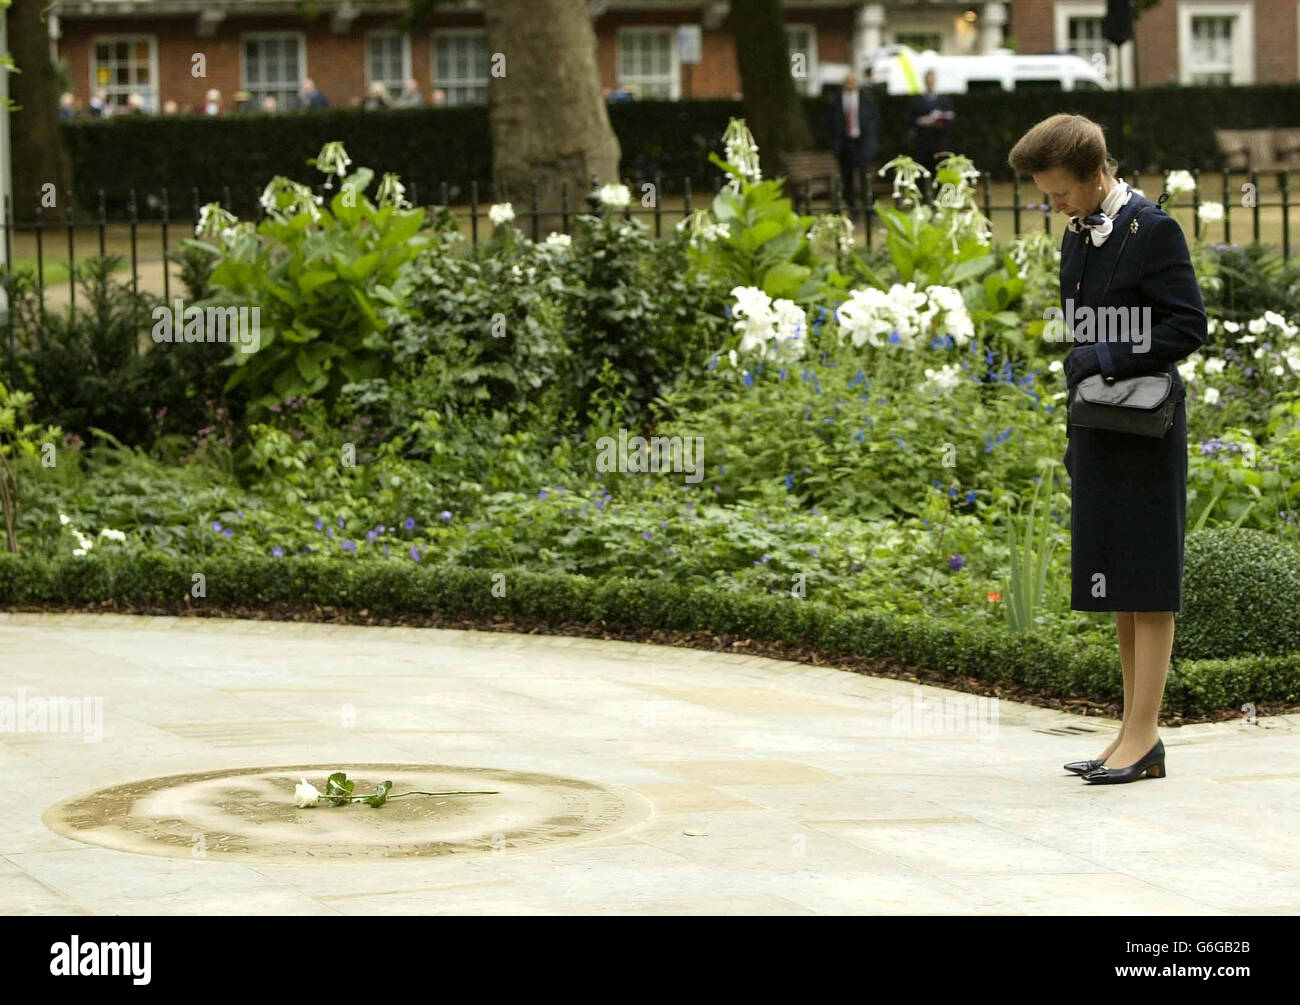 The Princess Royal opens the memorial garden in Grosvenor Square, London, dedicated to the memory of those who died when two hijacked passenger jets that crashed into the twin towers of New York's World Trade Centre. * The garden of remembrance contains a small pavilion bearing three bronze plaques, listing the names of victims for the UK, UK Overseas Territories and those with dual nationalities. Stock Photo